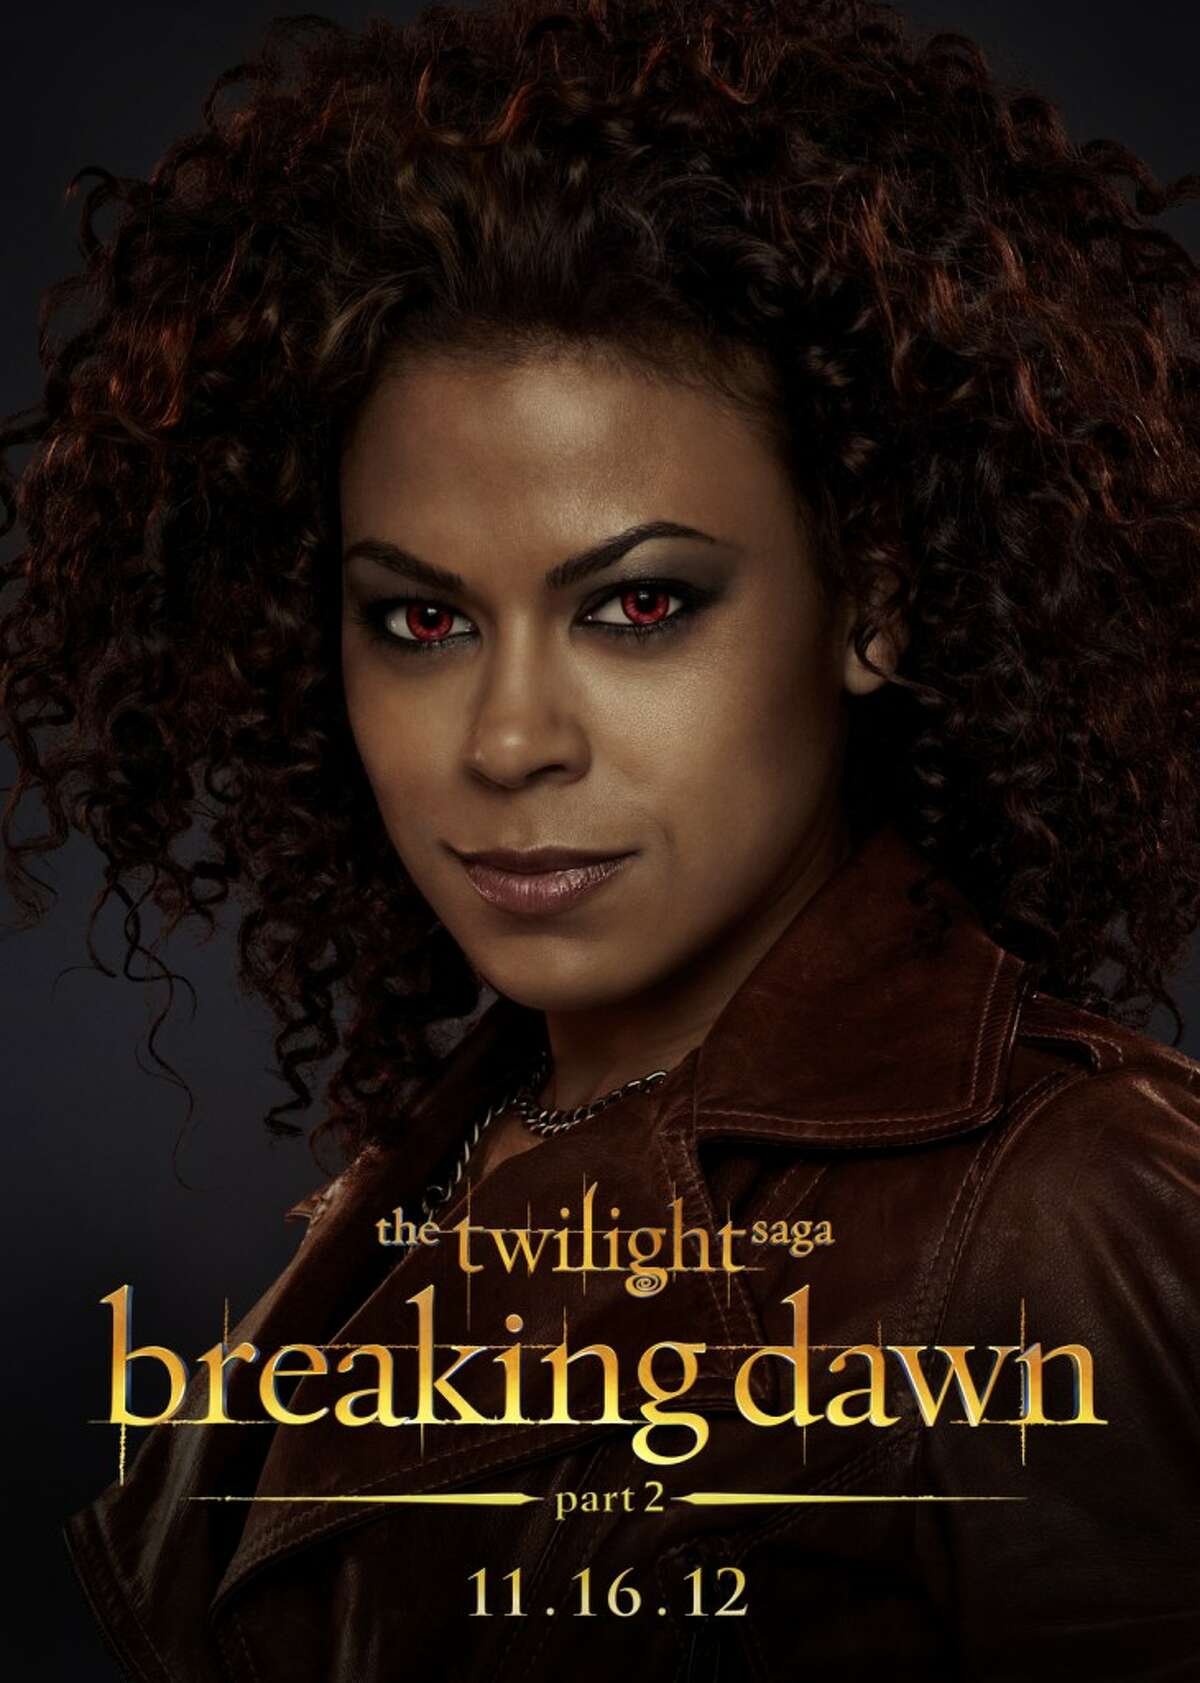 Manistee native Toni Trucks, who plays a support role in the Twilight sequel, will greet fans and hold a “Q and A” session in Ludington on Saturday. (Courtesy Image)